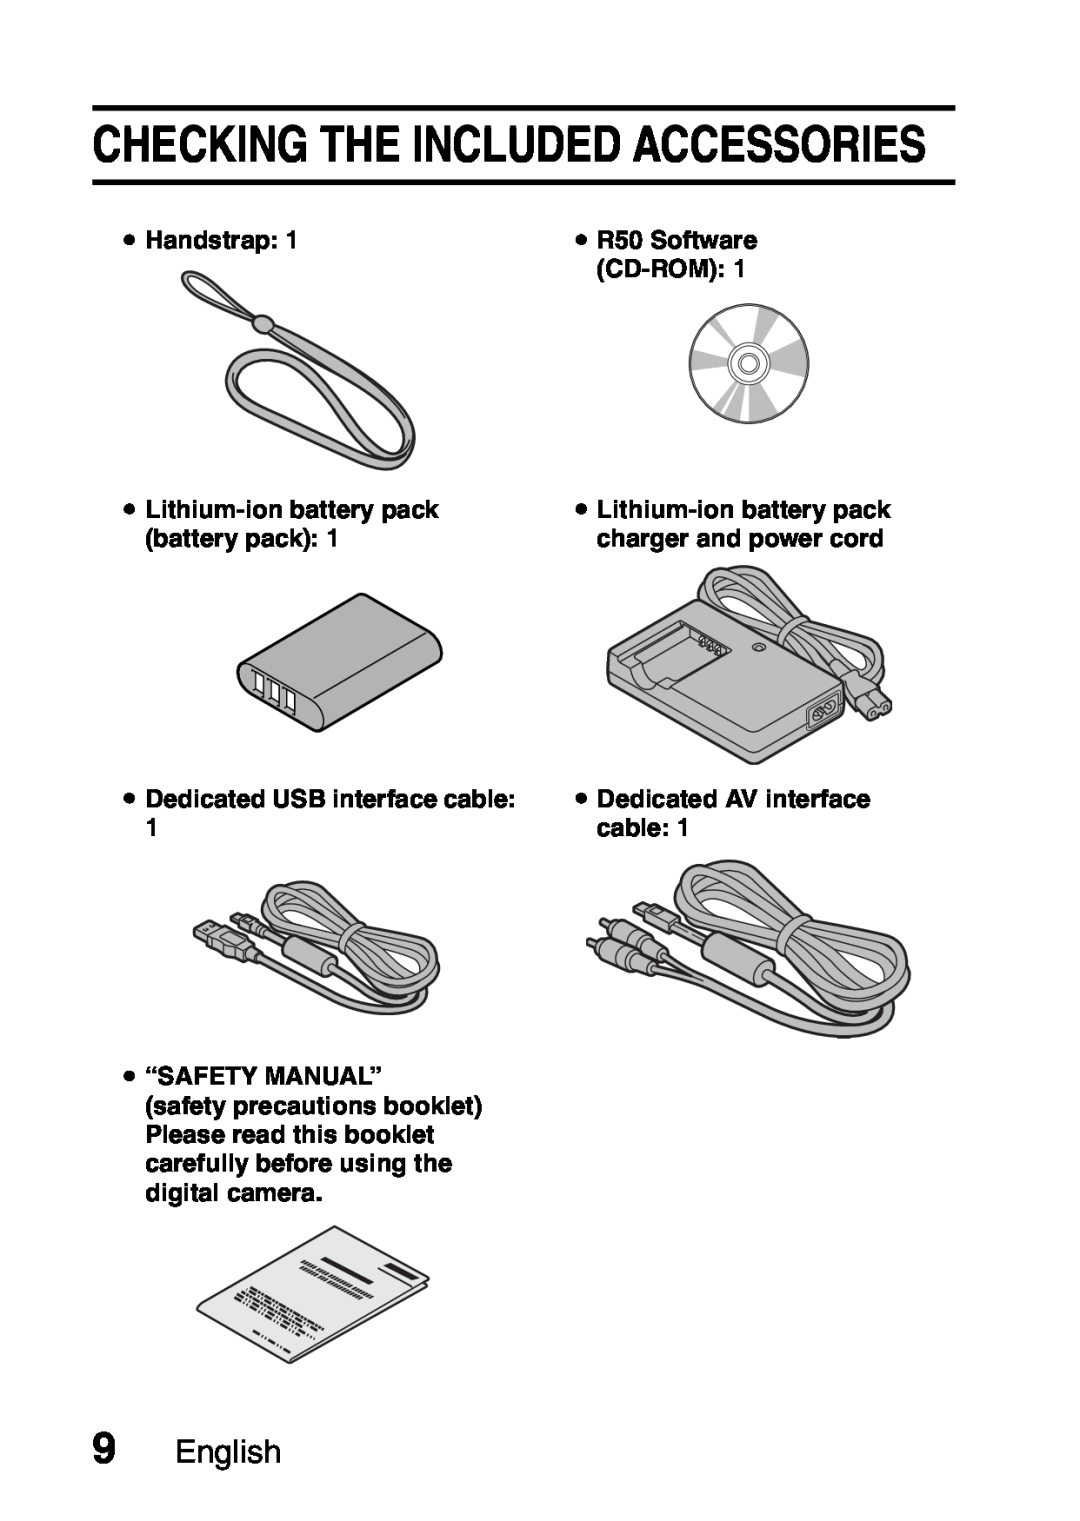 Samsung Checking The Included Accessories, English, i Handstrap, i R50 Software, Cd-Rom, i Lithium-ion battery pack 